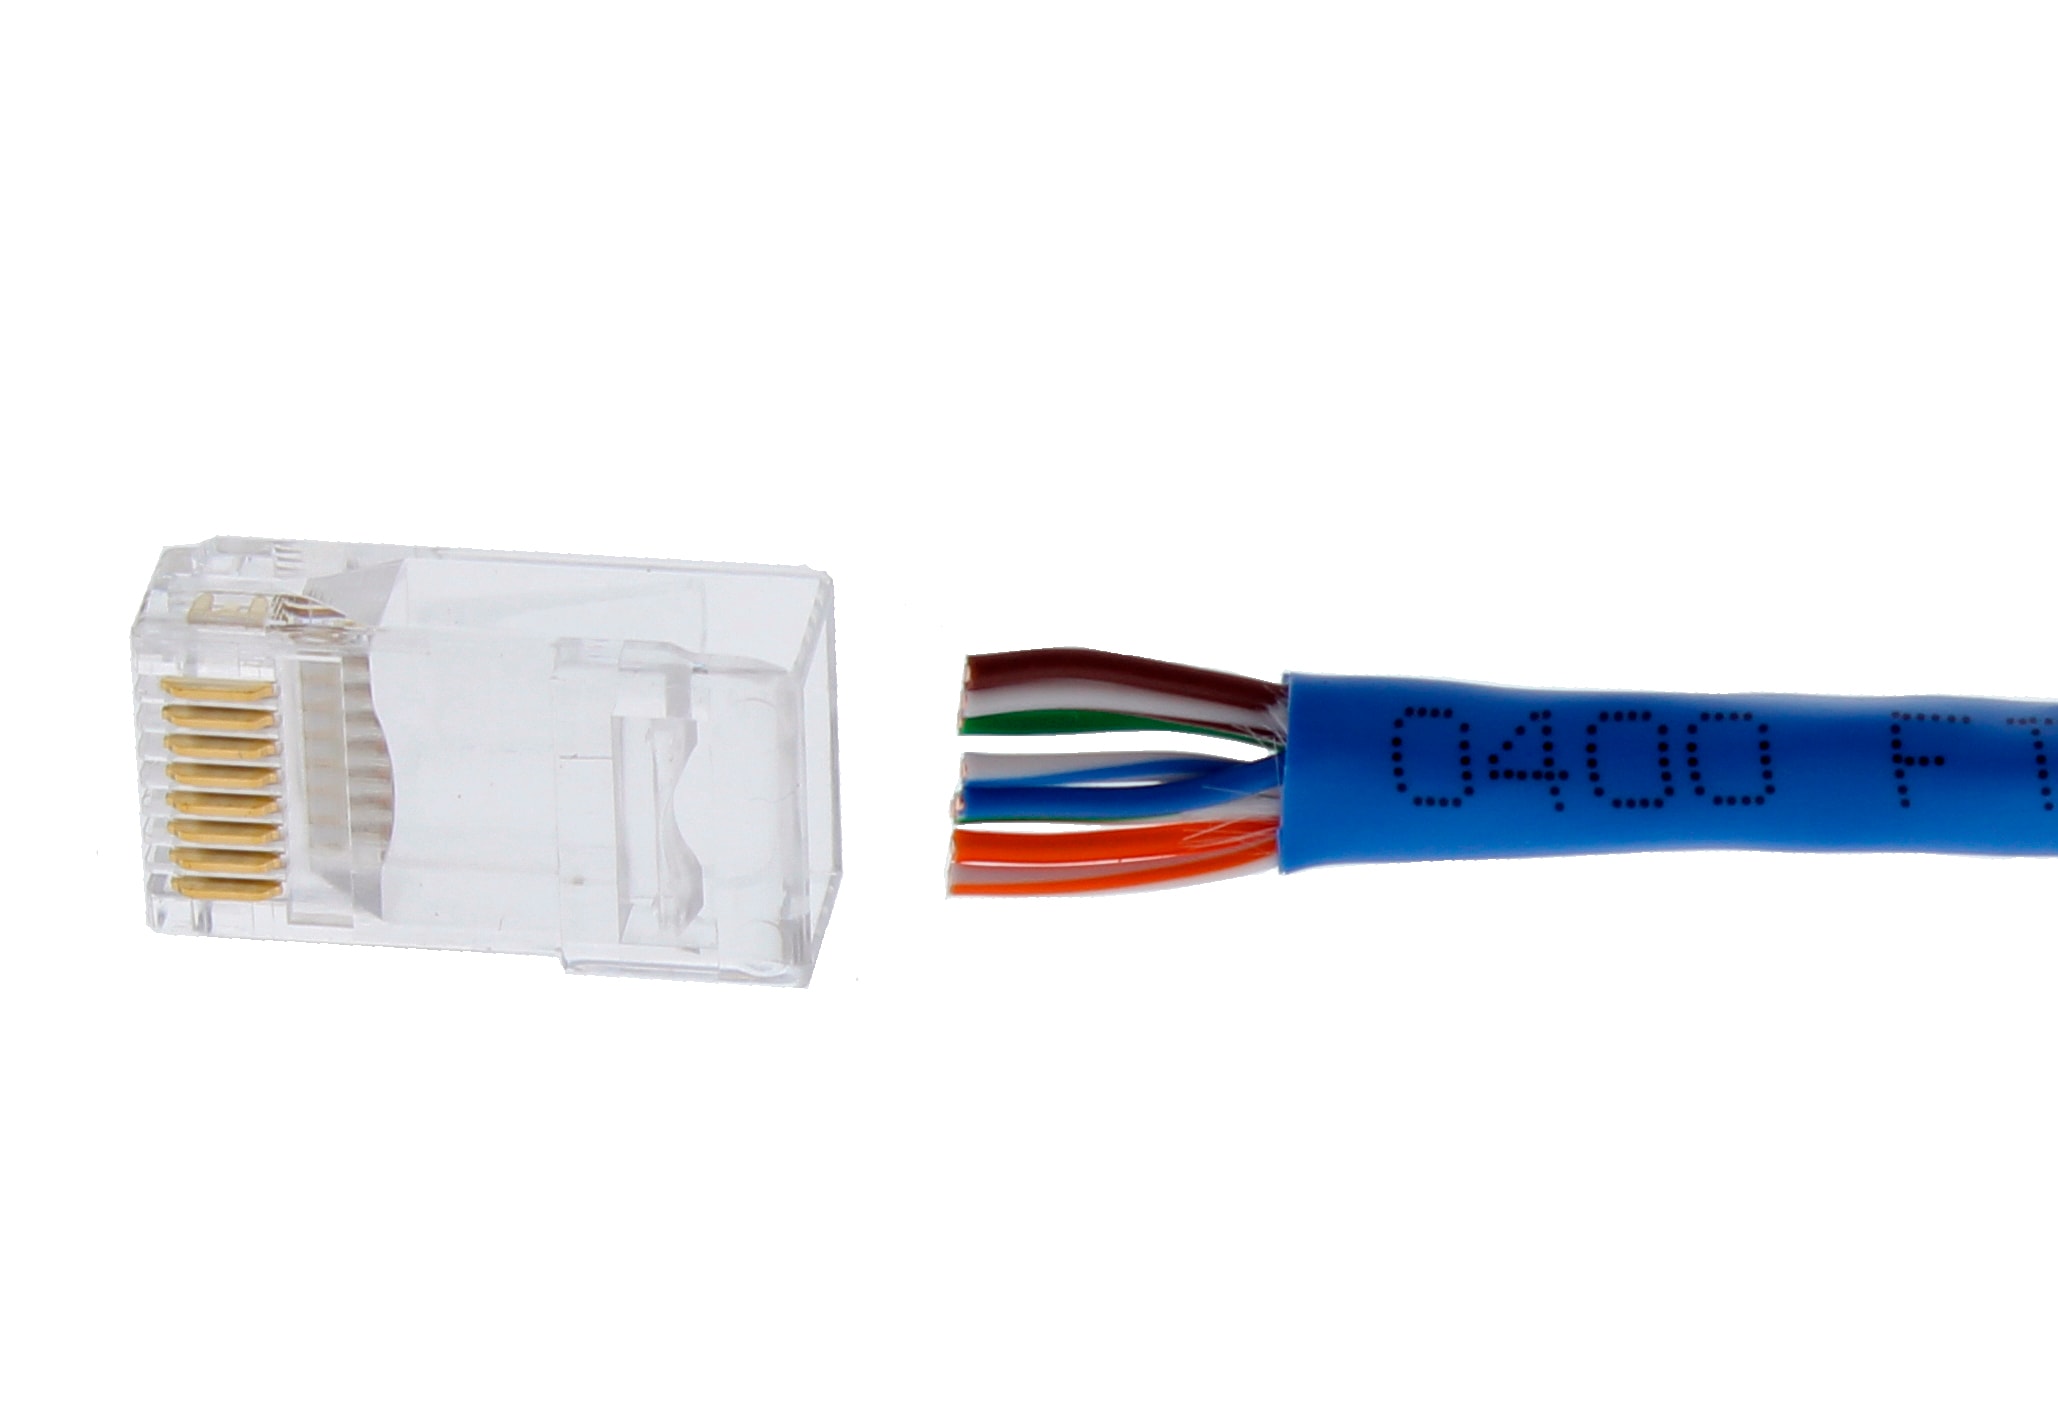 IDEAL 50-Pack Cat6 Rj45 Modular Plug in the Voice & Data Connectors  department at